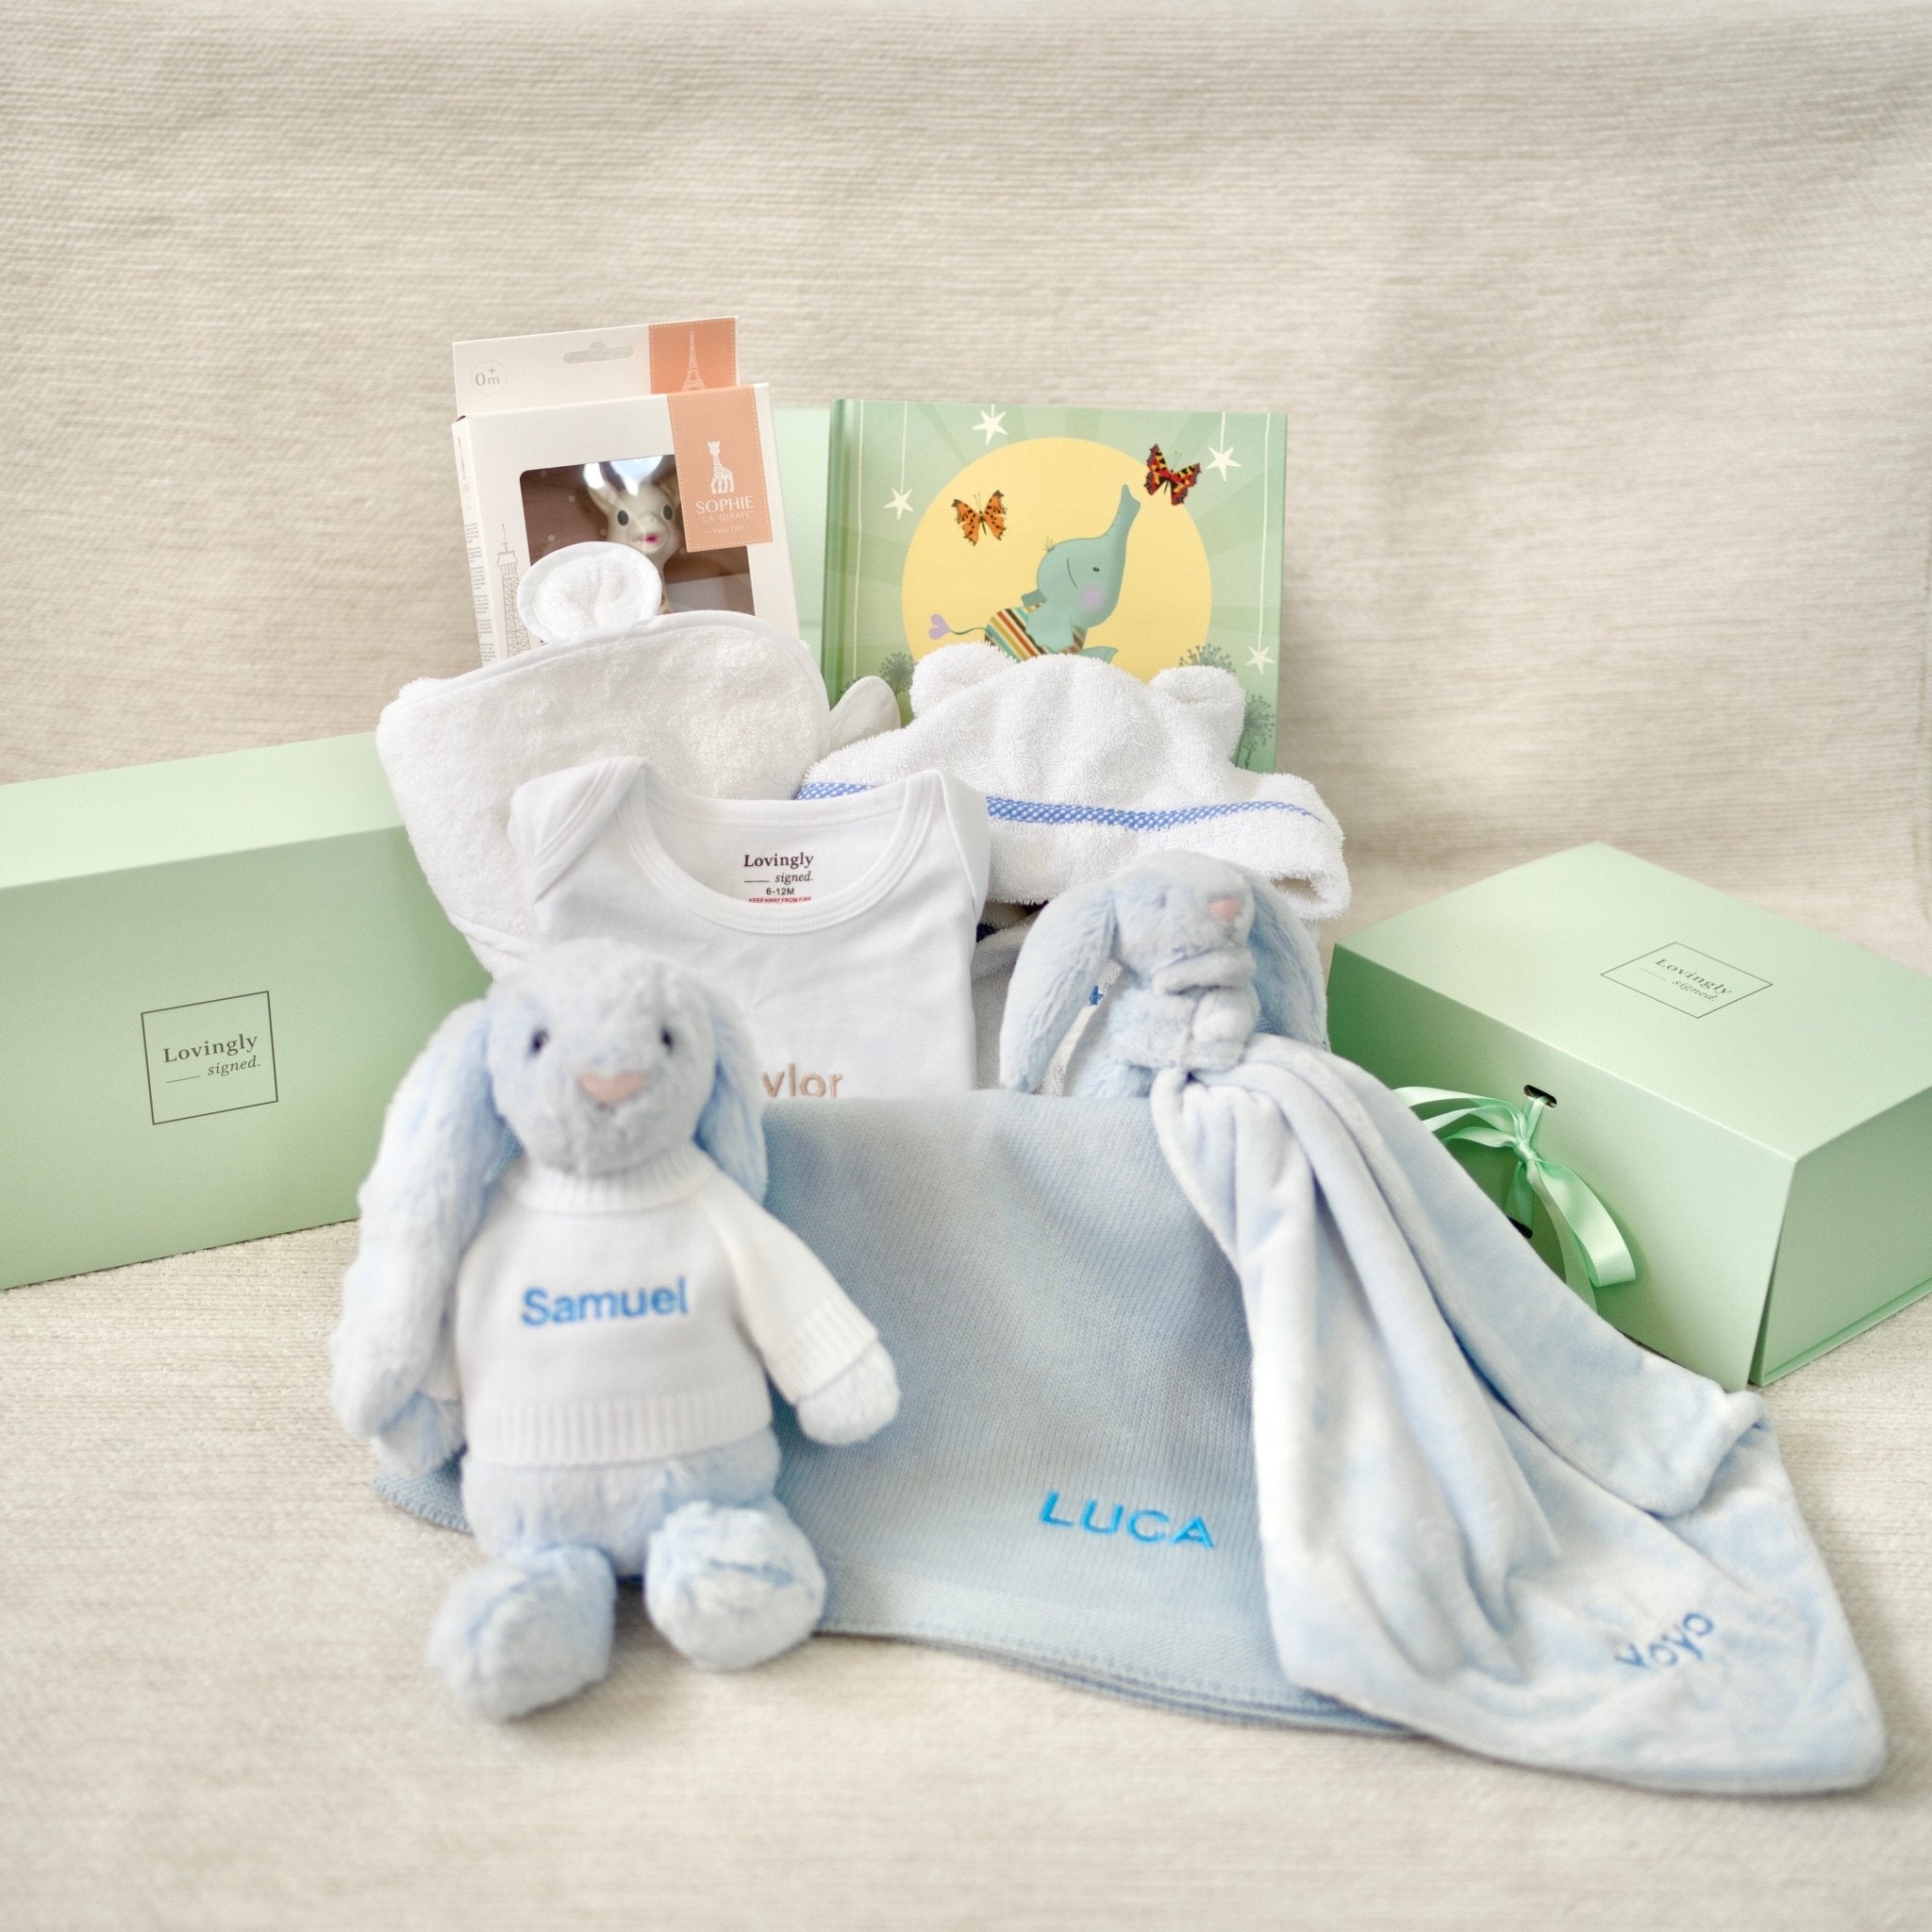 Personalised Baby Gifts Nappy Caddy Set - New Born Baby Boy Gift, Baby Boy  Hamper, Newborn Essentials, Newborn Gift Set - Personalised New Baby Gifts  with Multi-Functional Blue Nappy Caddy Bag :